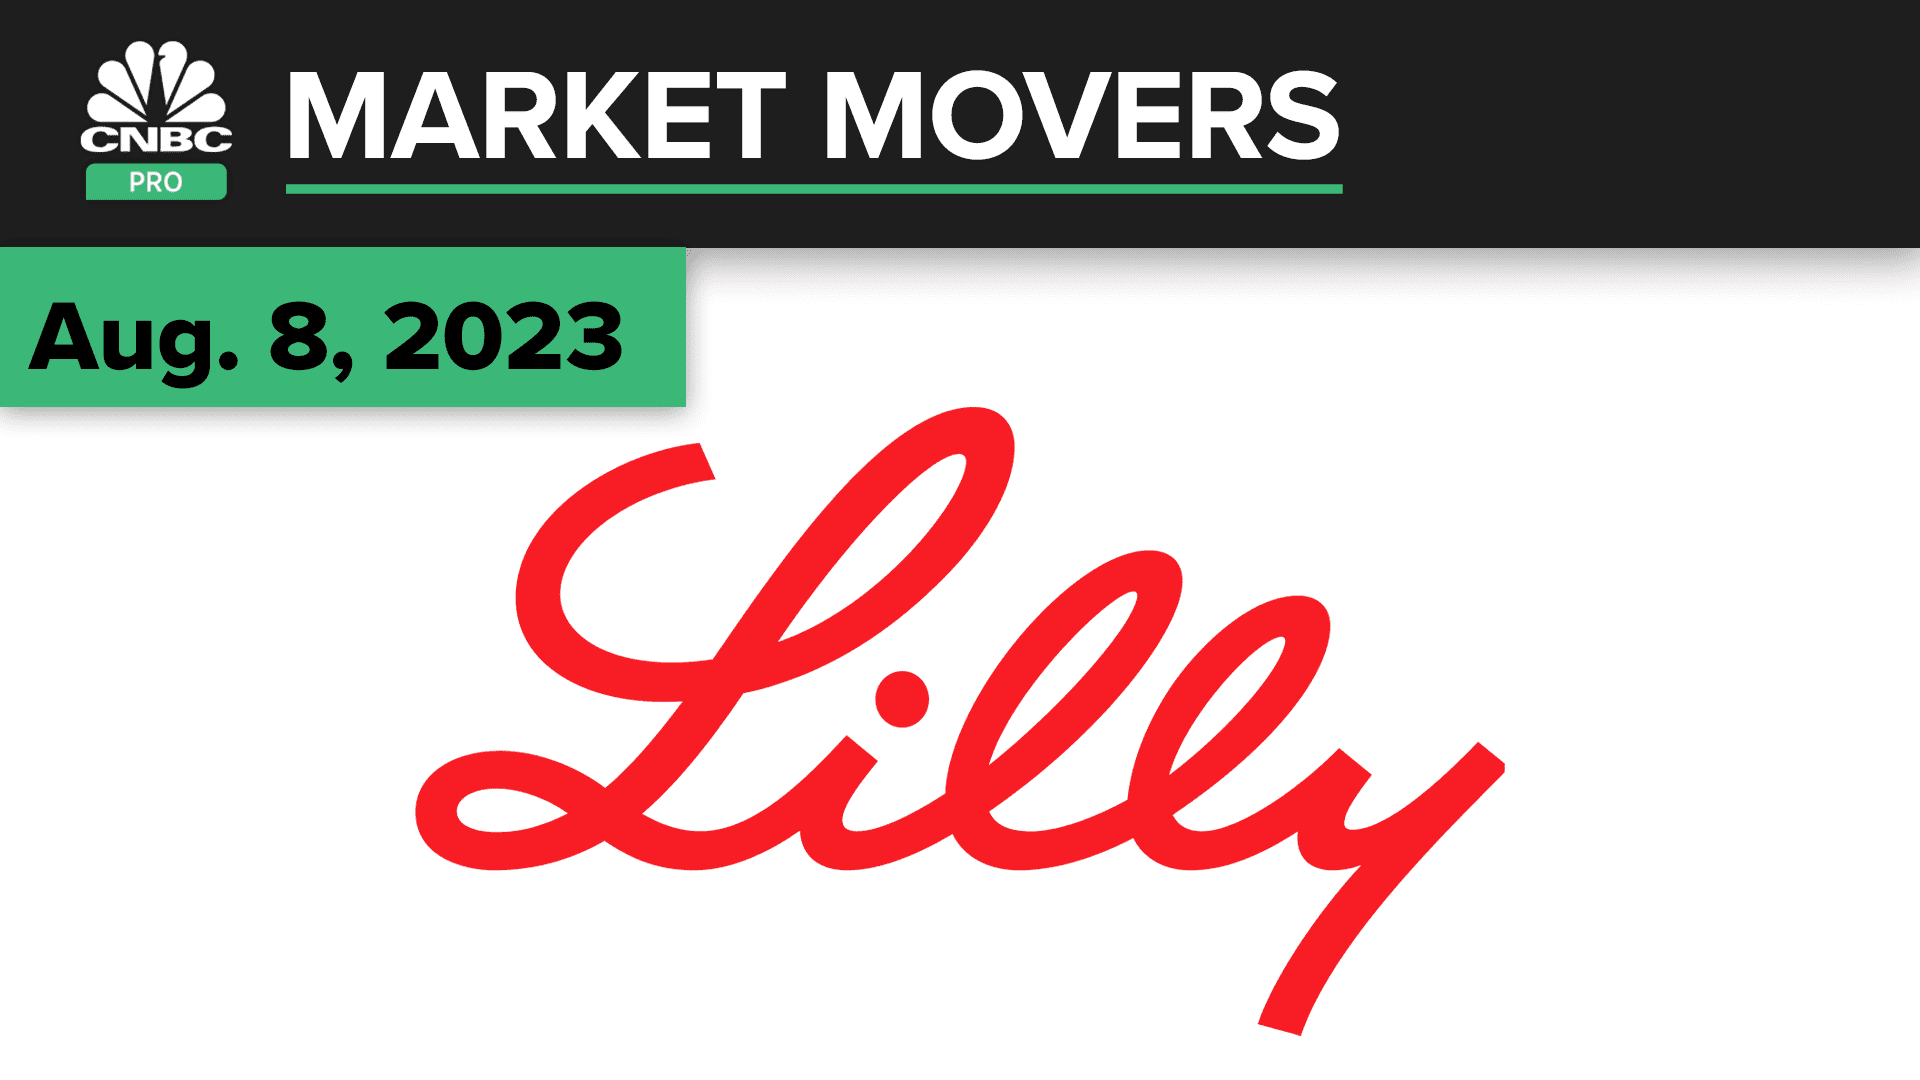 Eli Lilly hits document high immediately after earnings, Mounjaro hype. This is what the professionals are saying